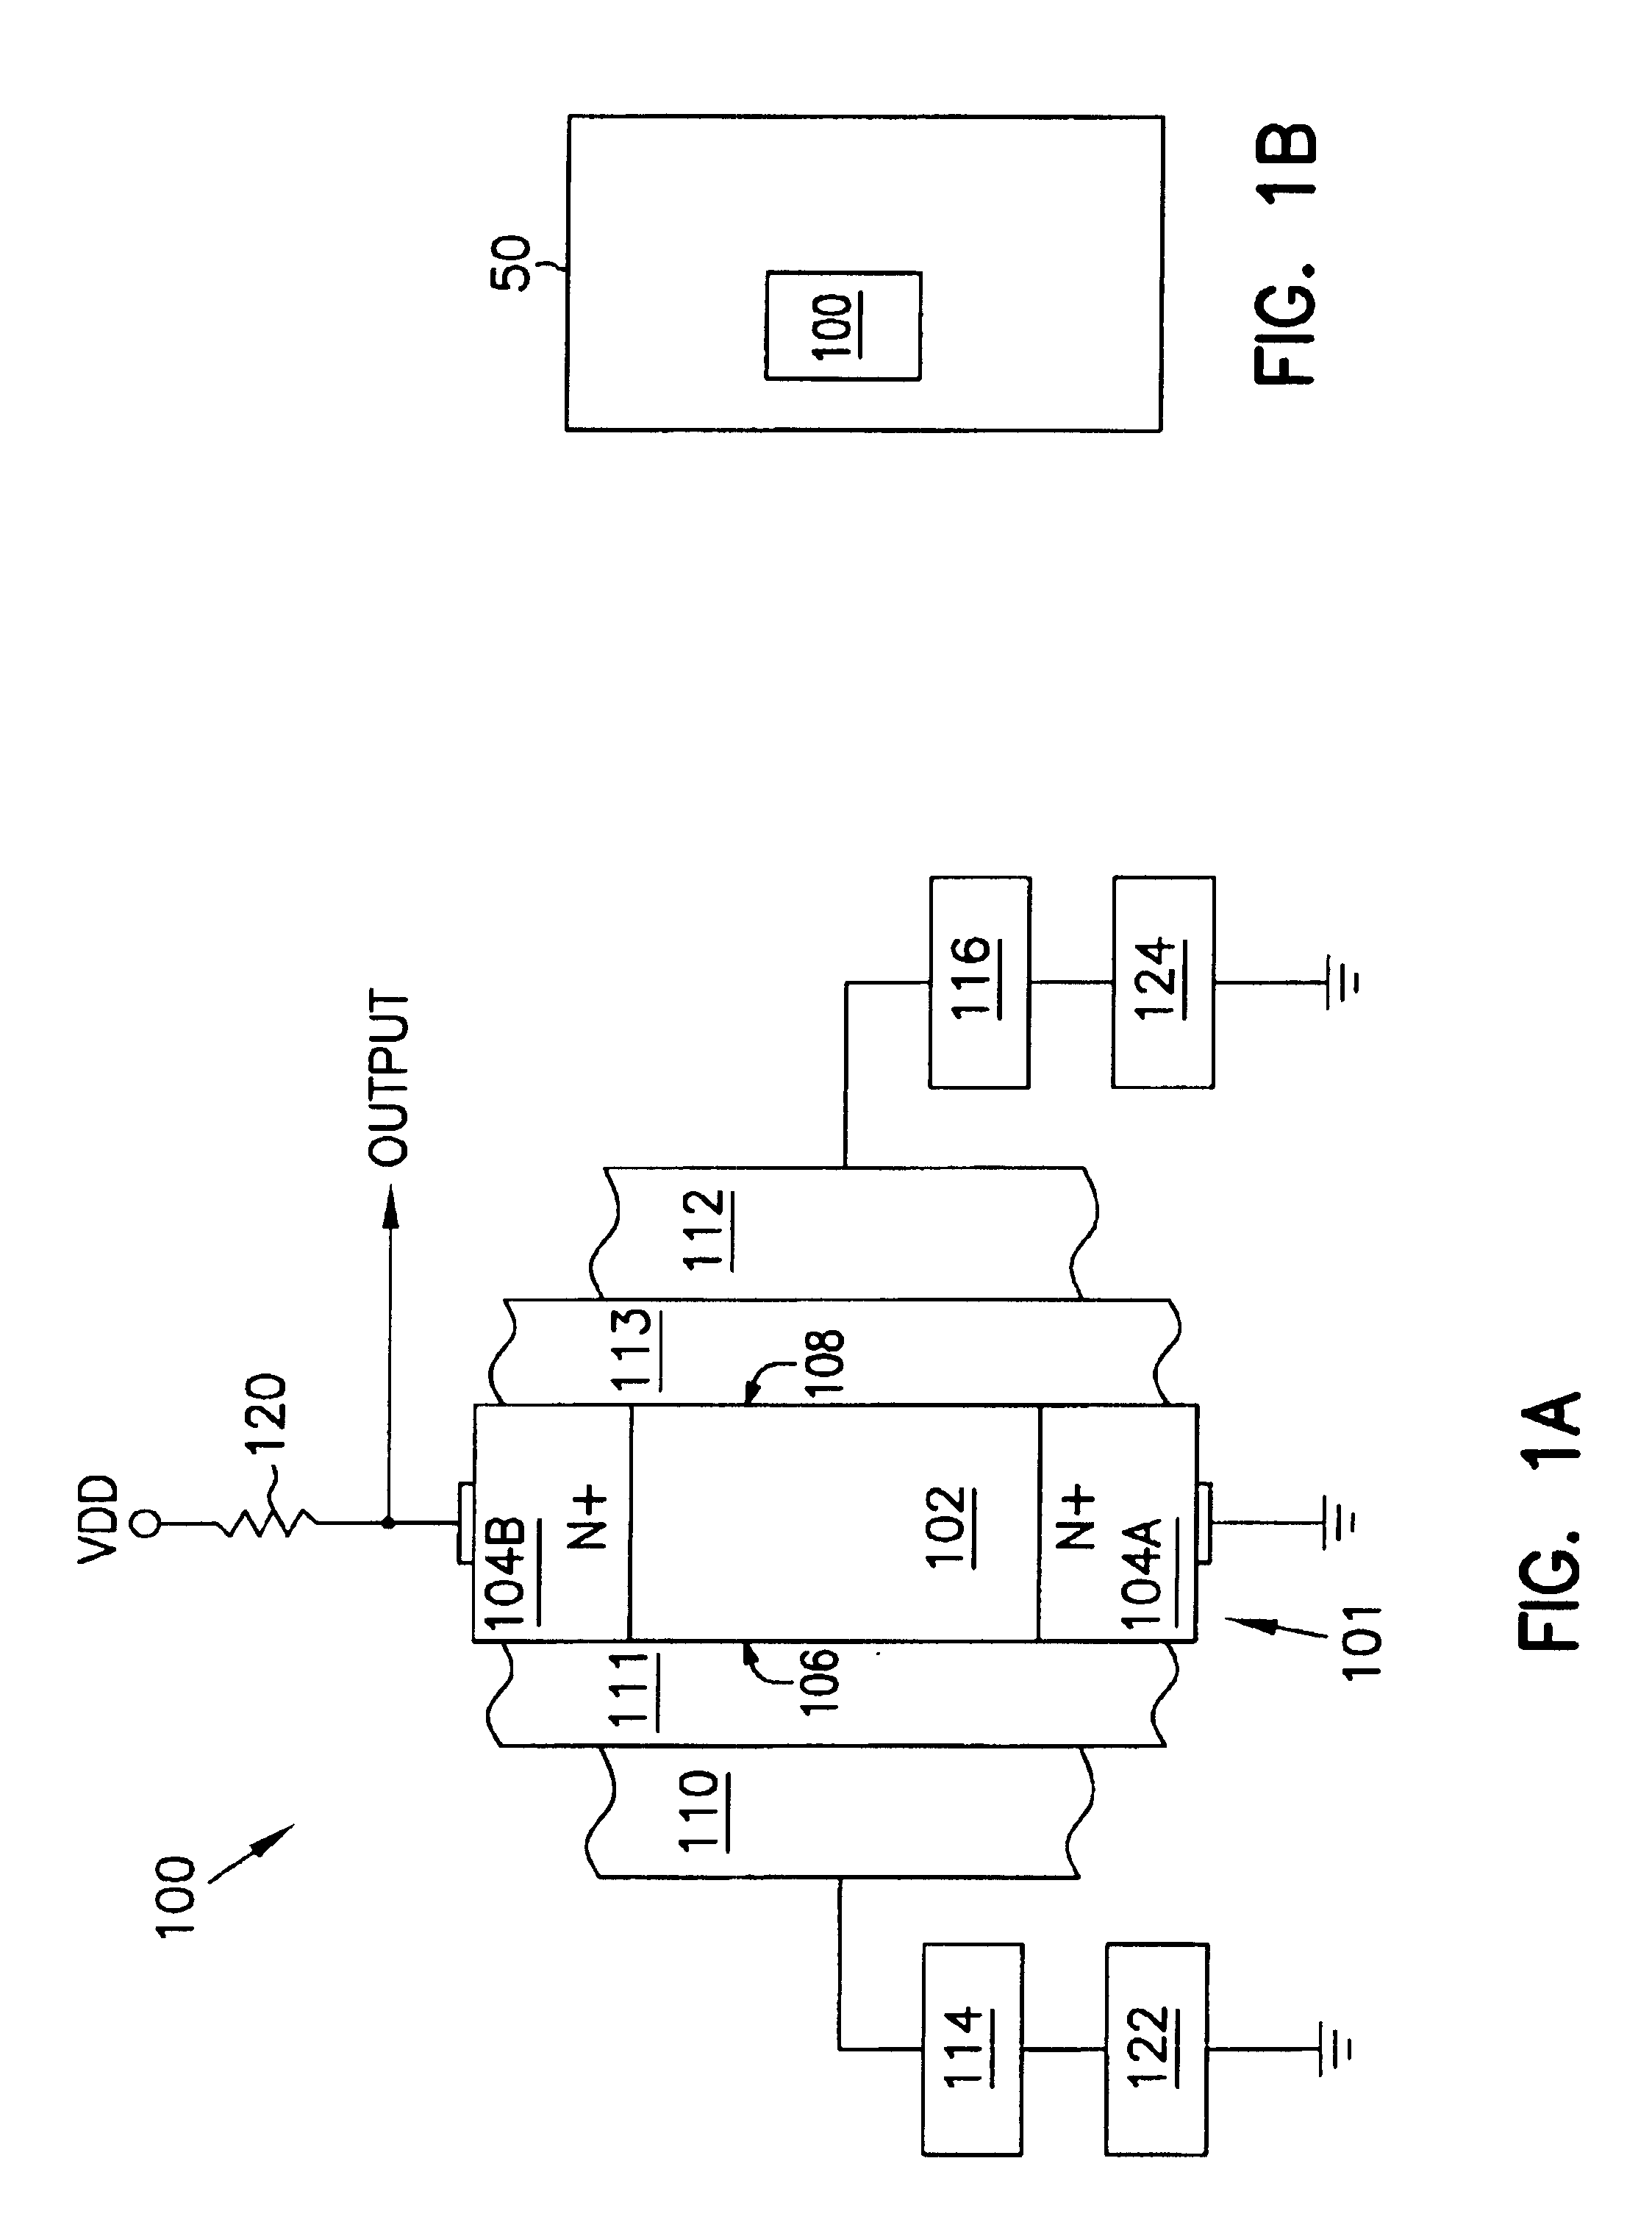 Method of fabricating a transistor on a substrate to operate as a fully depleted structure